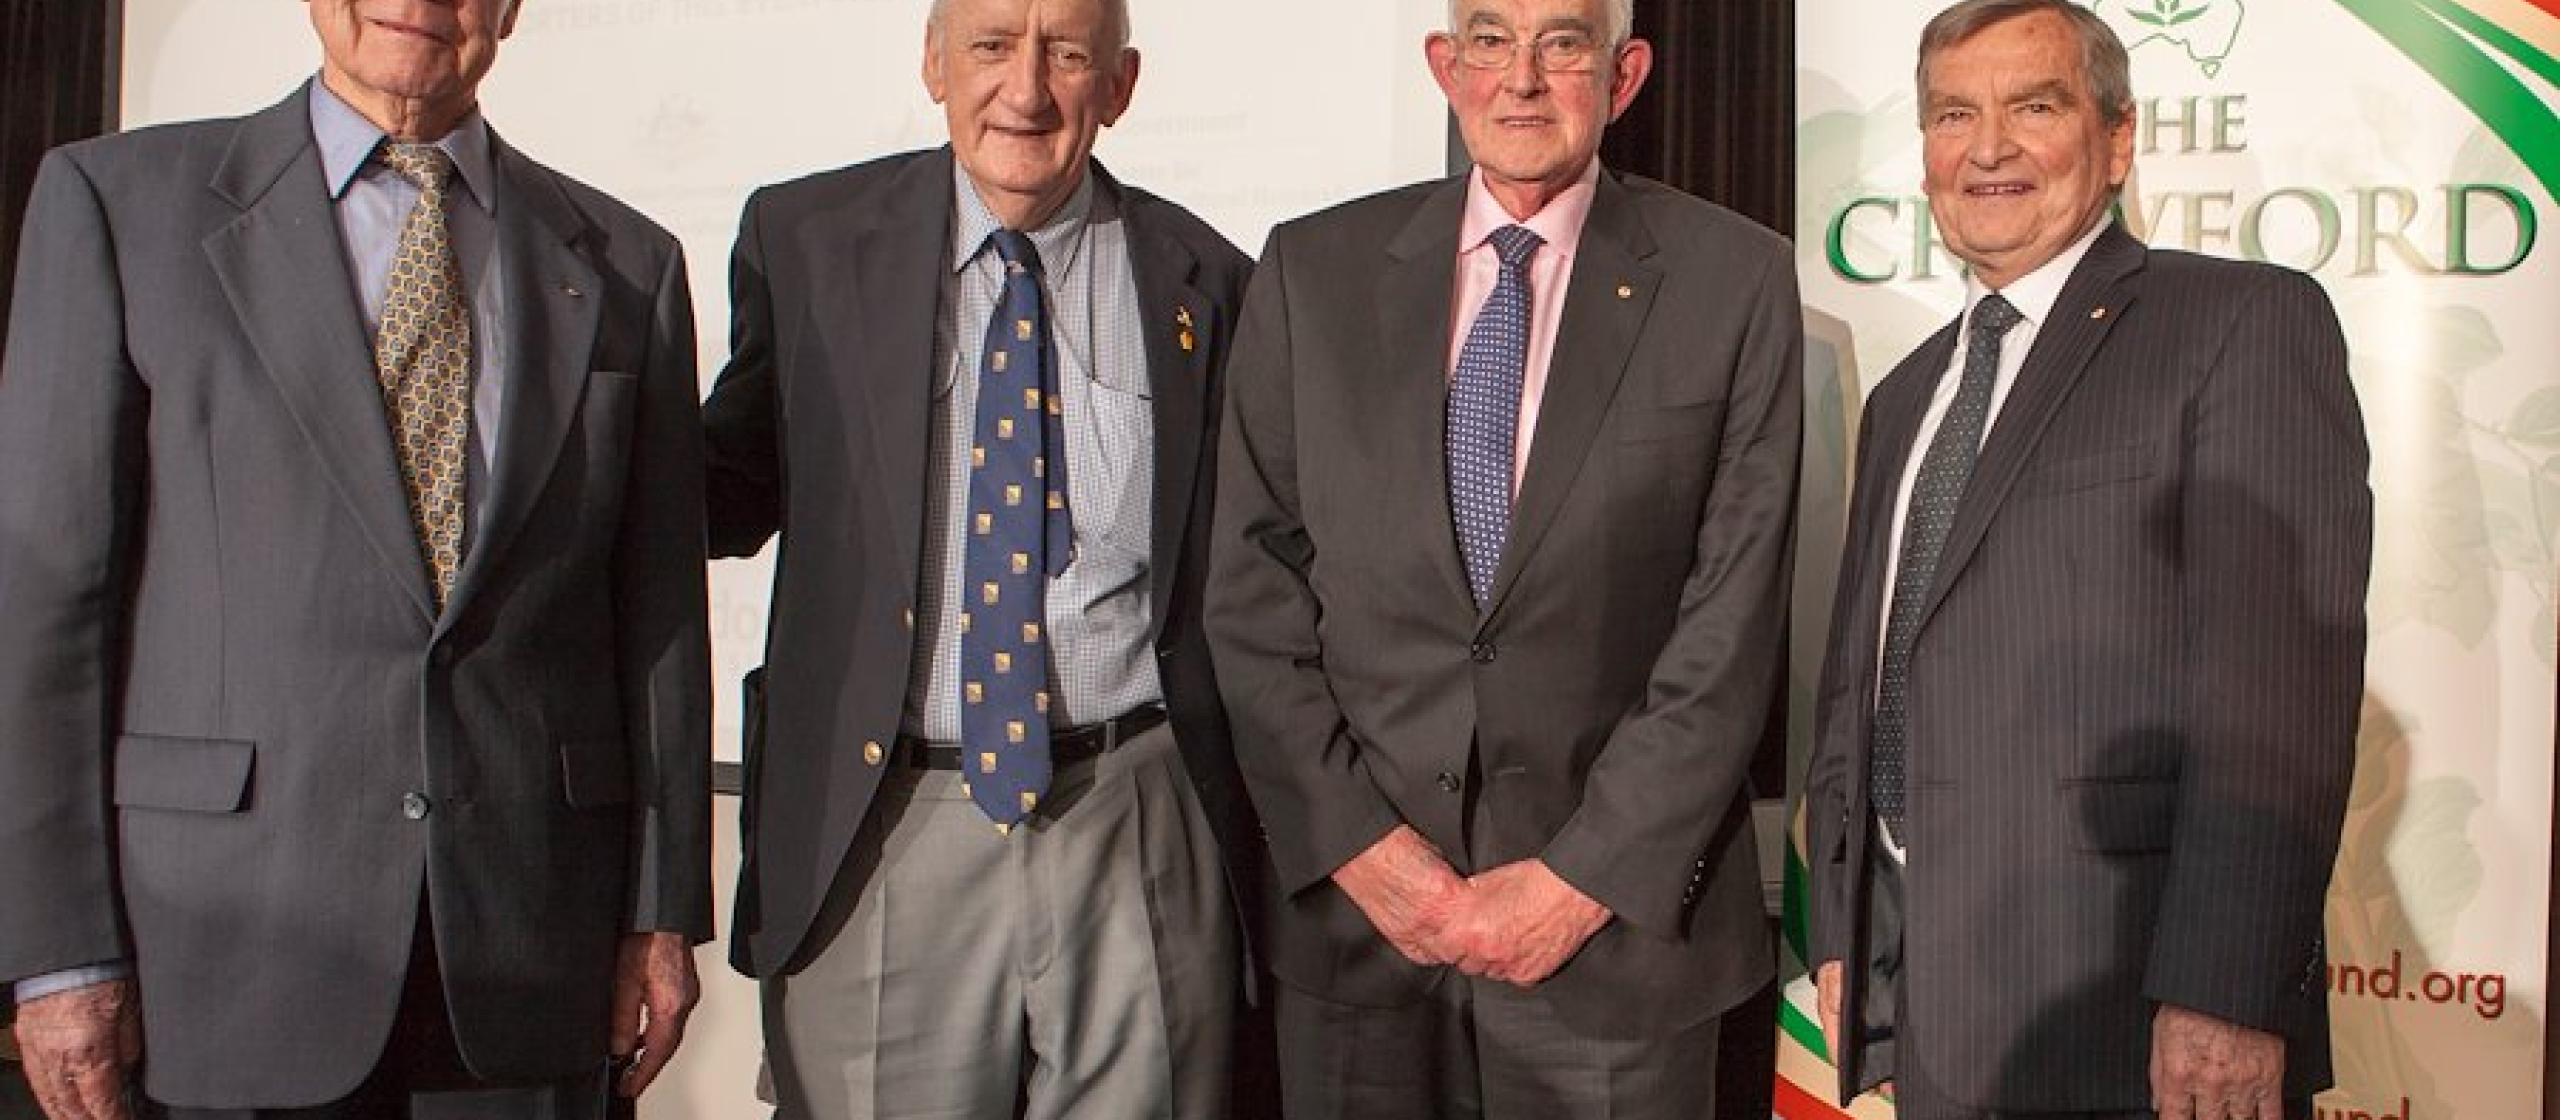 Members of the crawford fund